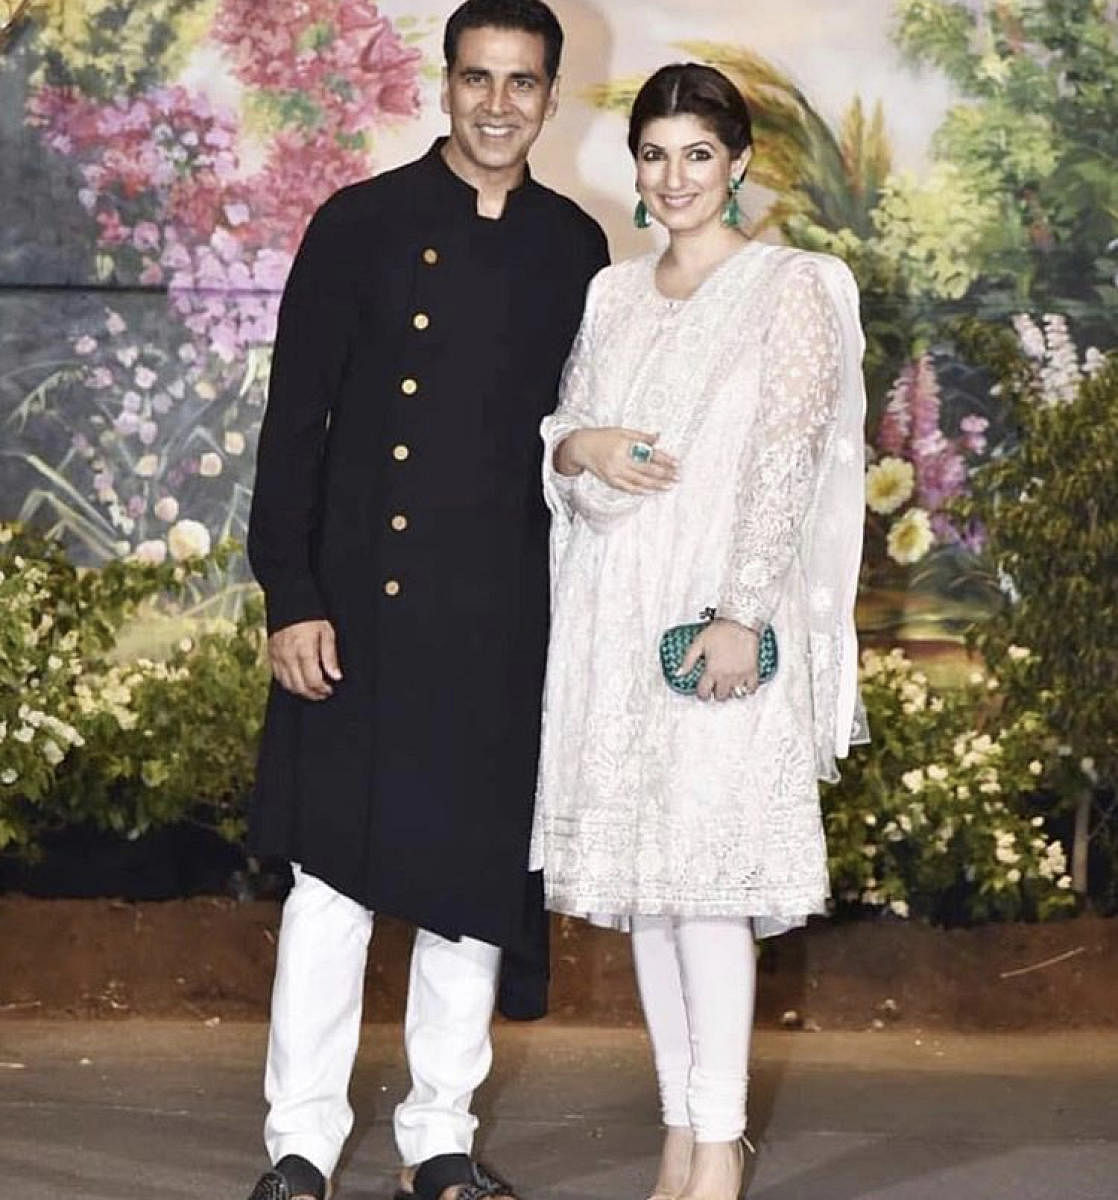 Akshay Kumar and Twinkle Khanna have been vocal about their opposing political views.